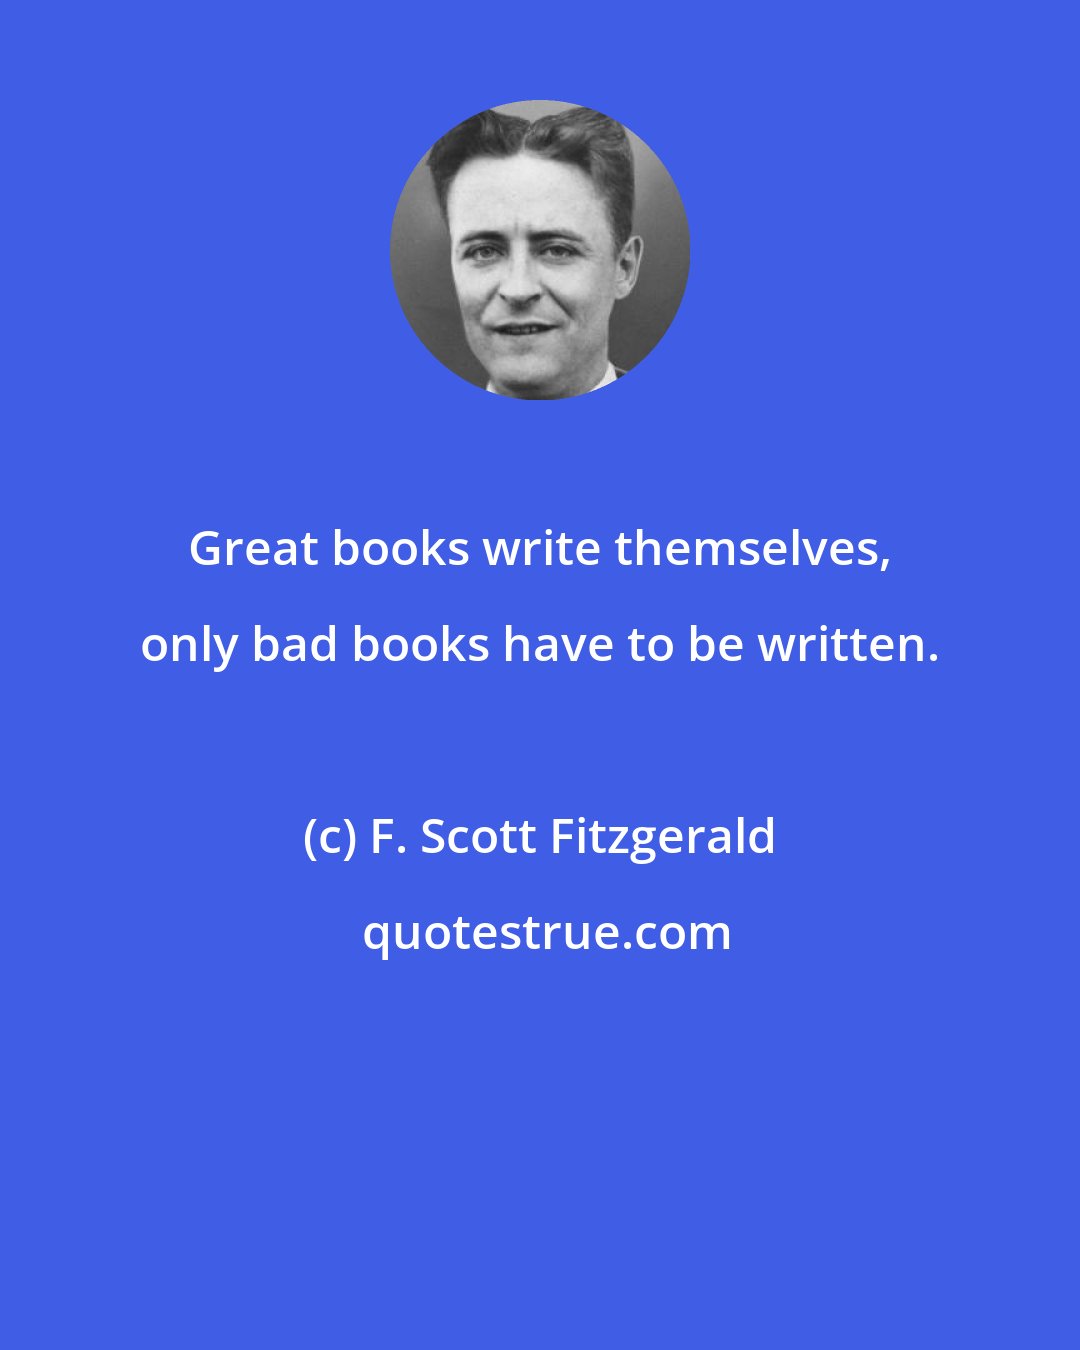 F. Scott Fitzgerald: Great books write themselves, only bad books have to be written.